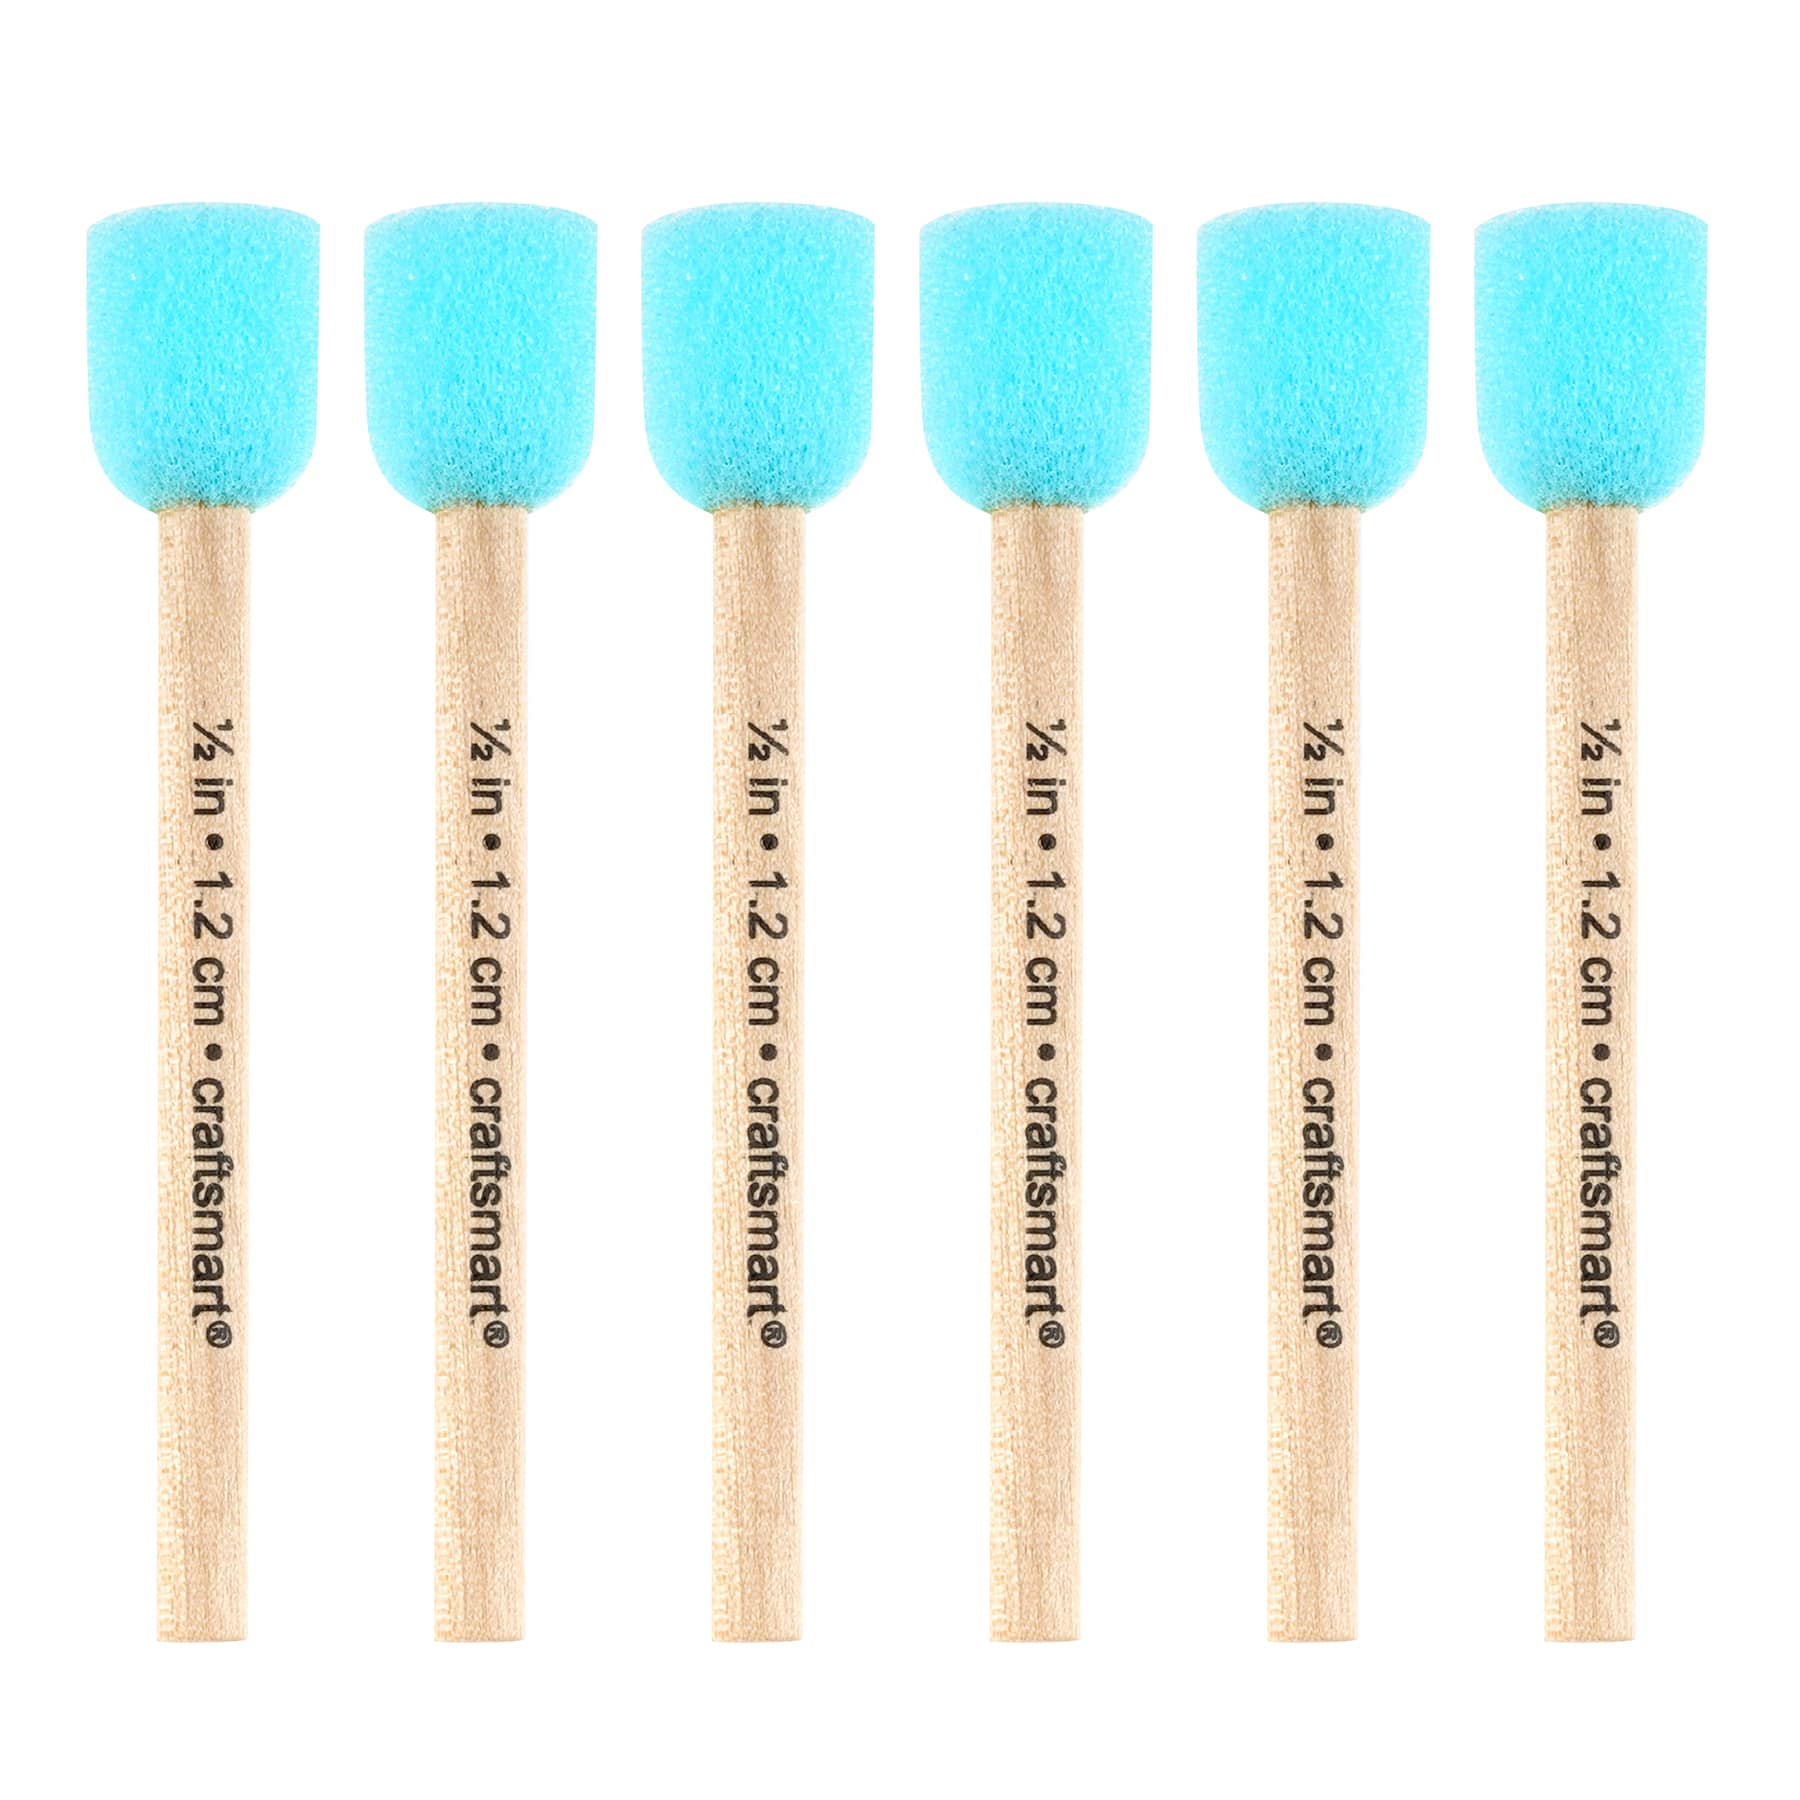 Incraftables Sponge Brushes for Painting 24pcs. Foam Brushes for Staining,  DIY Crafts, Acrylic Paints, Arts, Polyurethane & Mod Podge. Best Assorted Sponge  Paint Brushes (1”, 2”, 3” & 4 Inch)